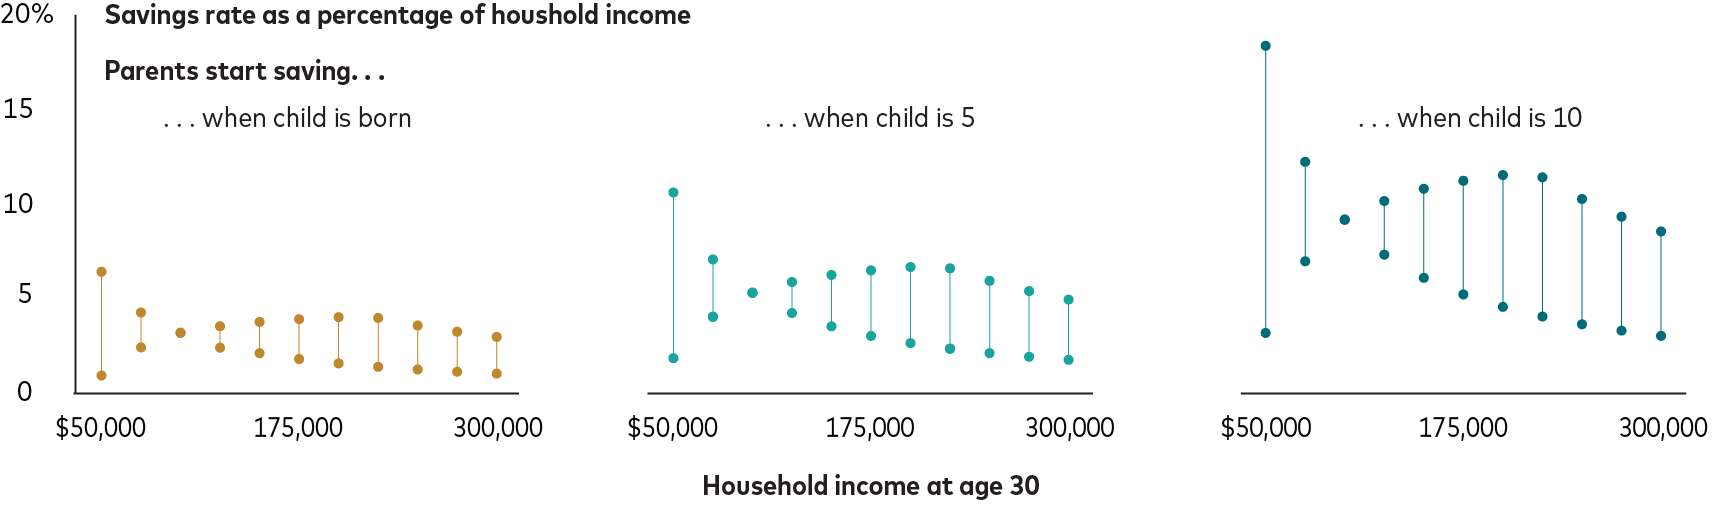 Three charts arranged horizontally show projected savings rates across income levels, grouped by a child’s age when college saving begins: newborn (left chart), 5 years old (center chart), or 10 years old (right chart). The y-axis represents the savings rate as a percentage of income and applies to all three charts. Each chart has its own x-axis, which represents household income when parents are 30 years old. Income ranges from $25,000 to $300,000 and is presented in increments of $25,000 across each x-axis for a total of 11 data points.  Alt text for left chart: Left chart shows that for parents who start saving when their child is born, the projected savings rates range is 1.1% to 6.4% if their household income at age 30 is $50,000, 2.5% to 4.3% if it is $75,000, 3.2% to 3.2% if it is $100,000, 2.6% to 3.6% if it is $125,000, 2.1% to 3.8% if it is $150,000, 1.8% to 3.9% if it is $175,000, 1.6% to 4.0% if it is $200,000, 1.4% to 4.0% if it is $225,000, 1.3% to 3.6% if it is $250,000, 1.2% to 3.3% if it is $275,000, and 1.1% to 3.0% if it is $300,000.  Alt text for center chart: Center chart shows that for parents who start saving when their child is 5, the projected savings rates range is 1.9% to 10.6% if their household income at age 30 is $50,000, 4.0% to 7.1% if it is $75,000, 5.3% to 5.3% if it is $100,000, 4.2% to 5.9% if it is $125,000, 3.5% to 6.2% if it is $150,000, 3.0% to 6.5% if it is $175,000, 2.6% to 6.7% if it is $200,000, 2.4% to 6.6% if it is $225,000, 2.1% to 5.9% if it is $250,000,  1.9% to 5.4% it is $275,000, and 1.8% to 4.9% if it is $300,000.   Alt text for right chart: Right chart shows that for parents who start saving when their child is 10, the projected savings rates range is 3.2% to 18.3% if their household income at age 30 is $50,000, 7.0% to 12.2% if it is $75,000, 9.2% to 9.2% if it is $100,000,7.3% to 10.2% if it is $125,000, 6.1% to 10.8% if it is $150,000, 5.2% to 11.2% if it is $175,000, 4.6% to 11.5% if it is $200,000, 4.1% to 11.4% if it is $225,000, 3.7% to 10.3% if it is $250,000, and 3.3% to 9.3% if it is $275,000, and 3.1% to 8.6% if it is $300,000.